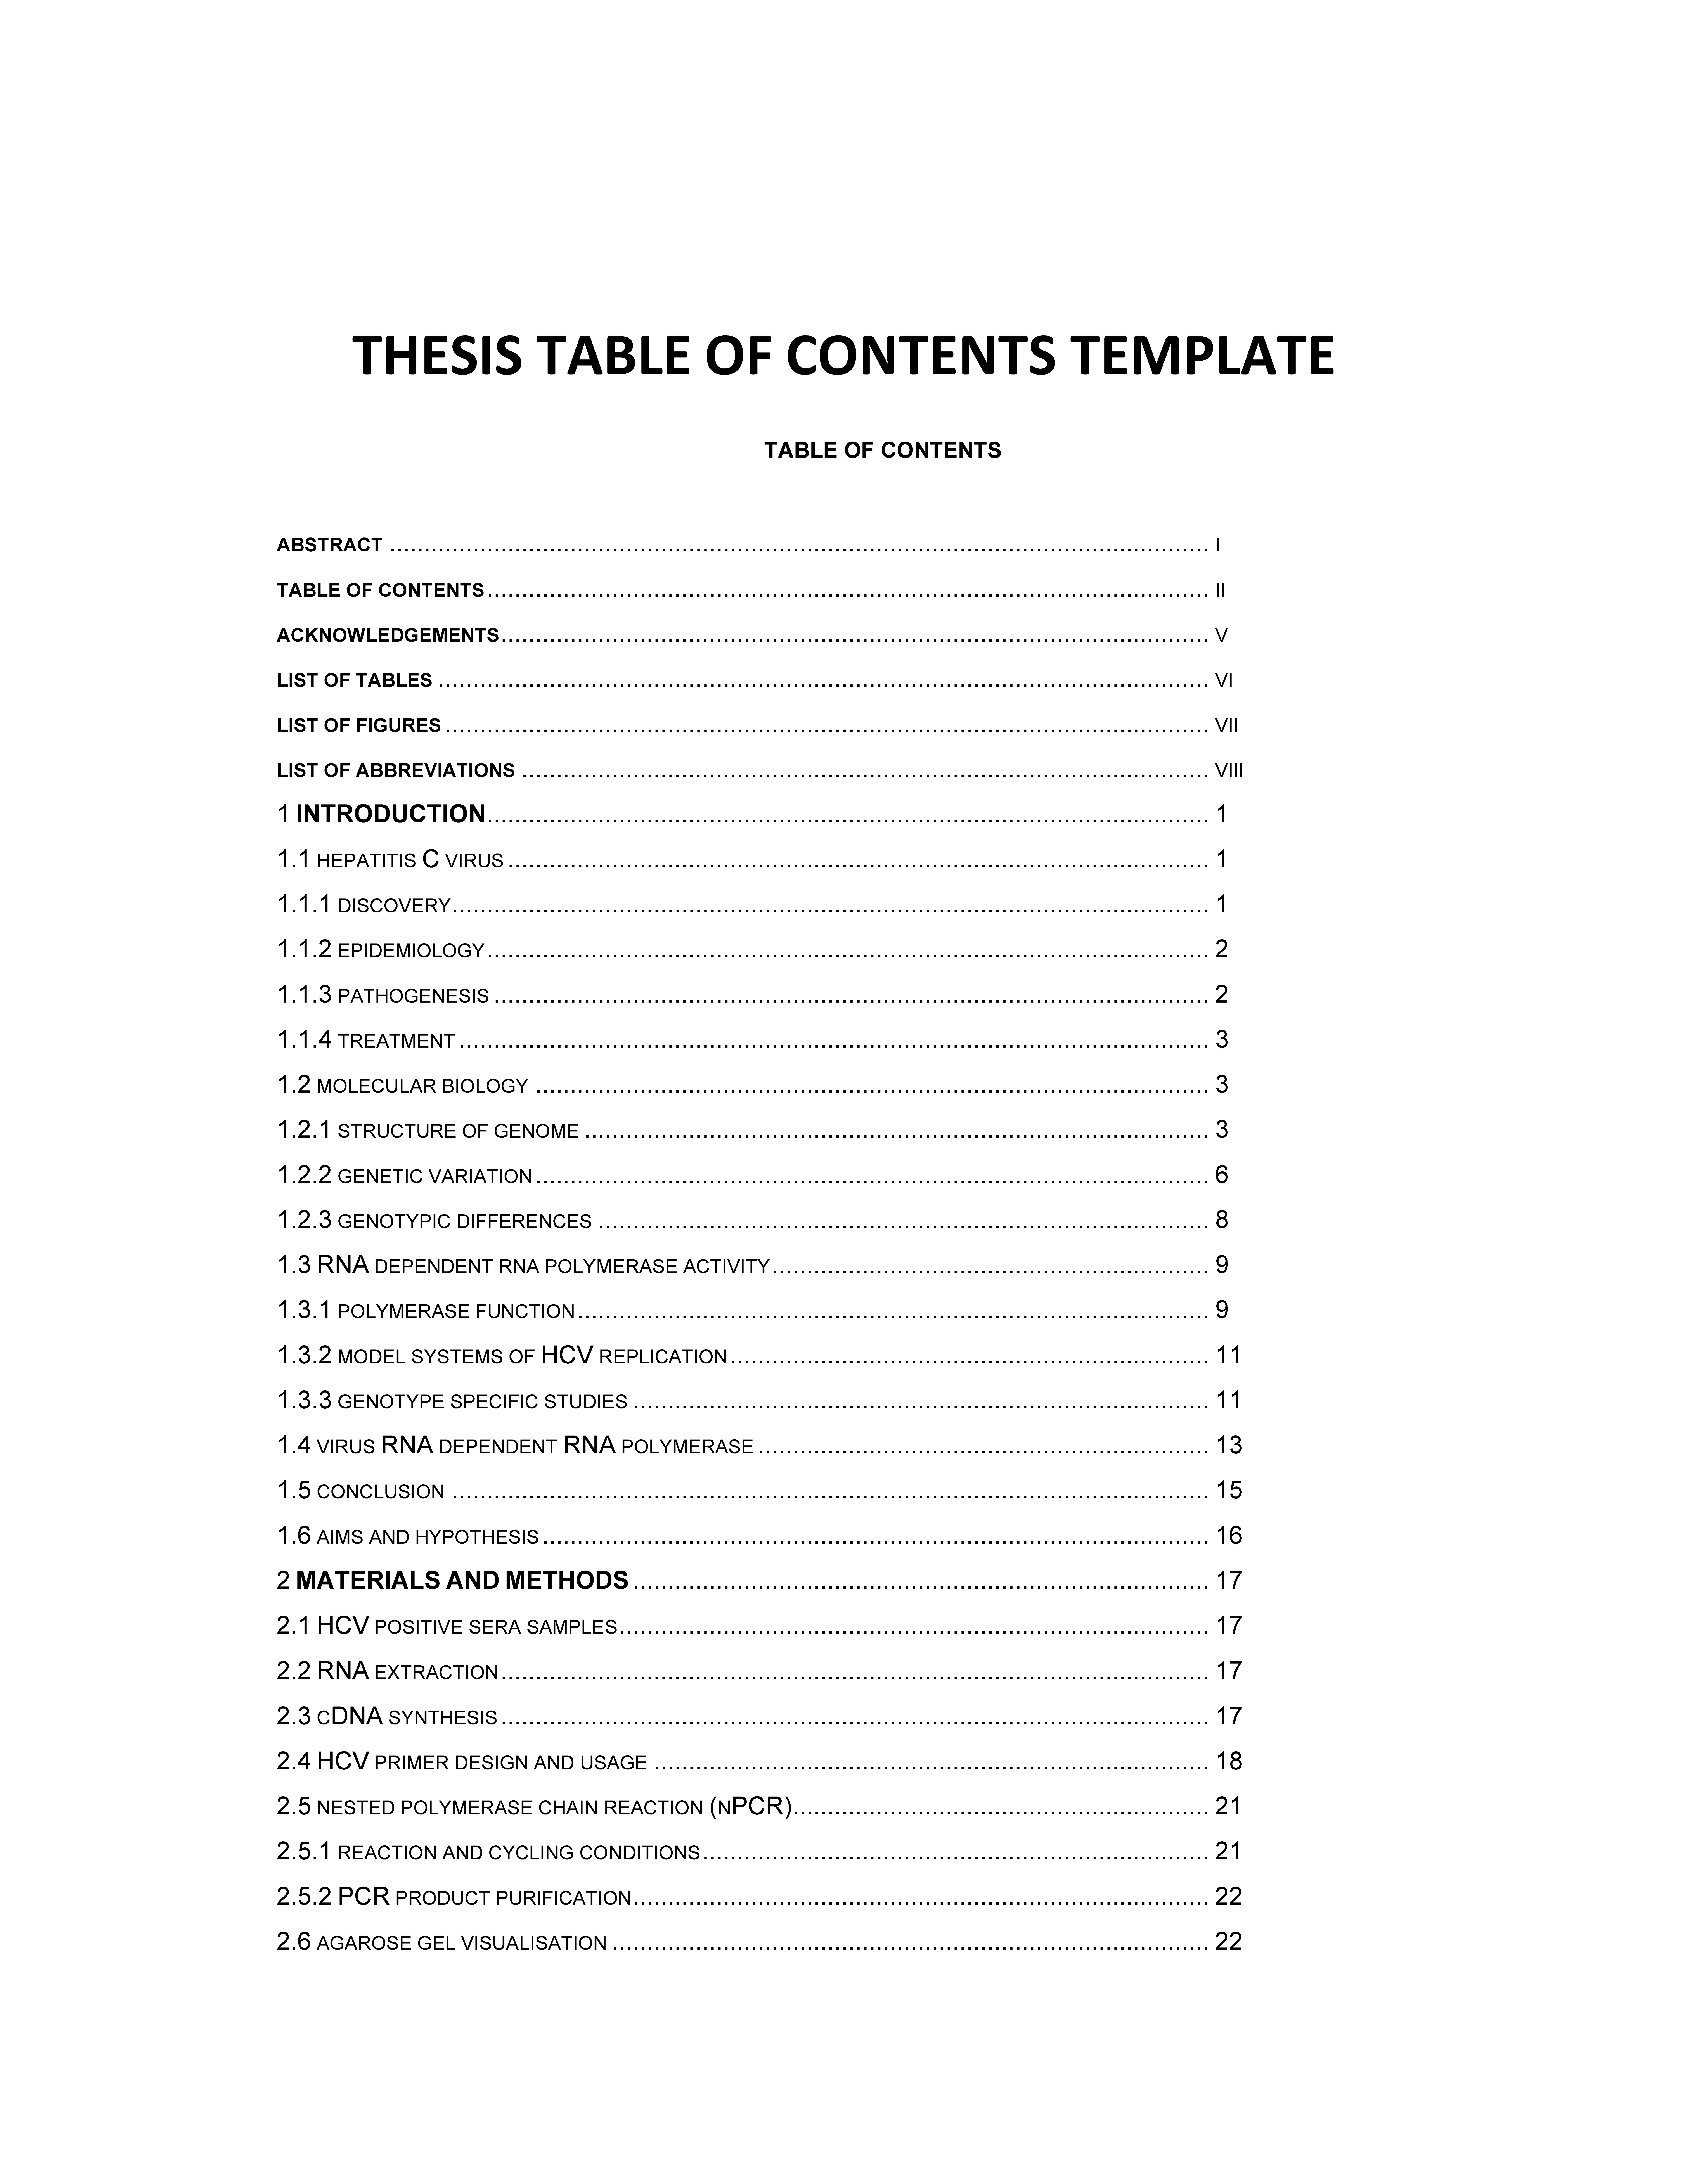 Thesis Table of Contents template 模板